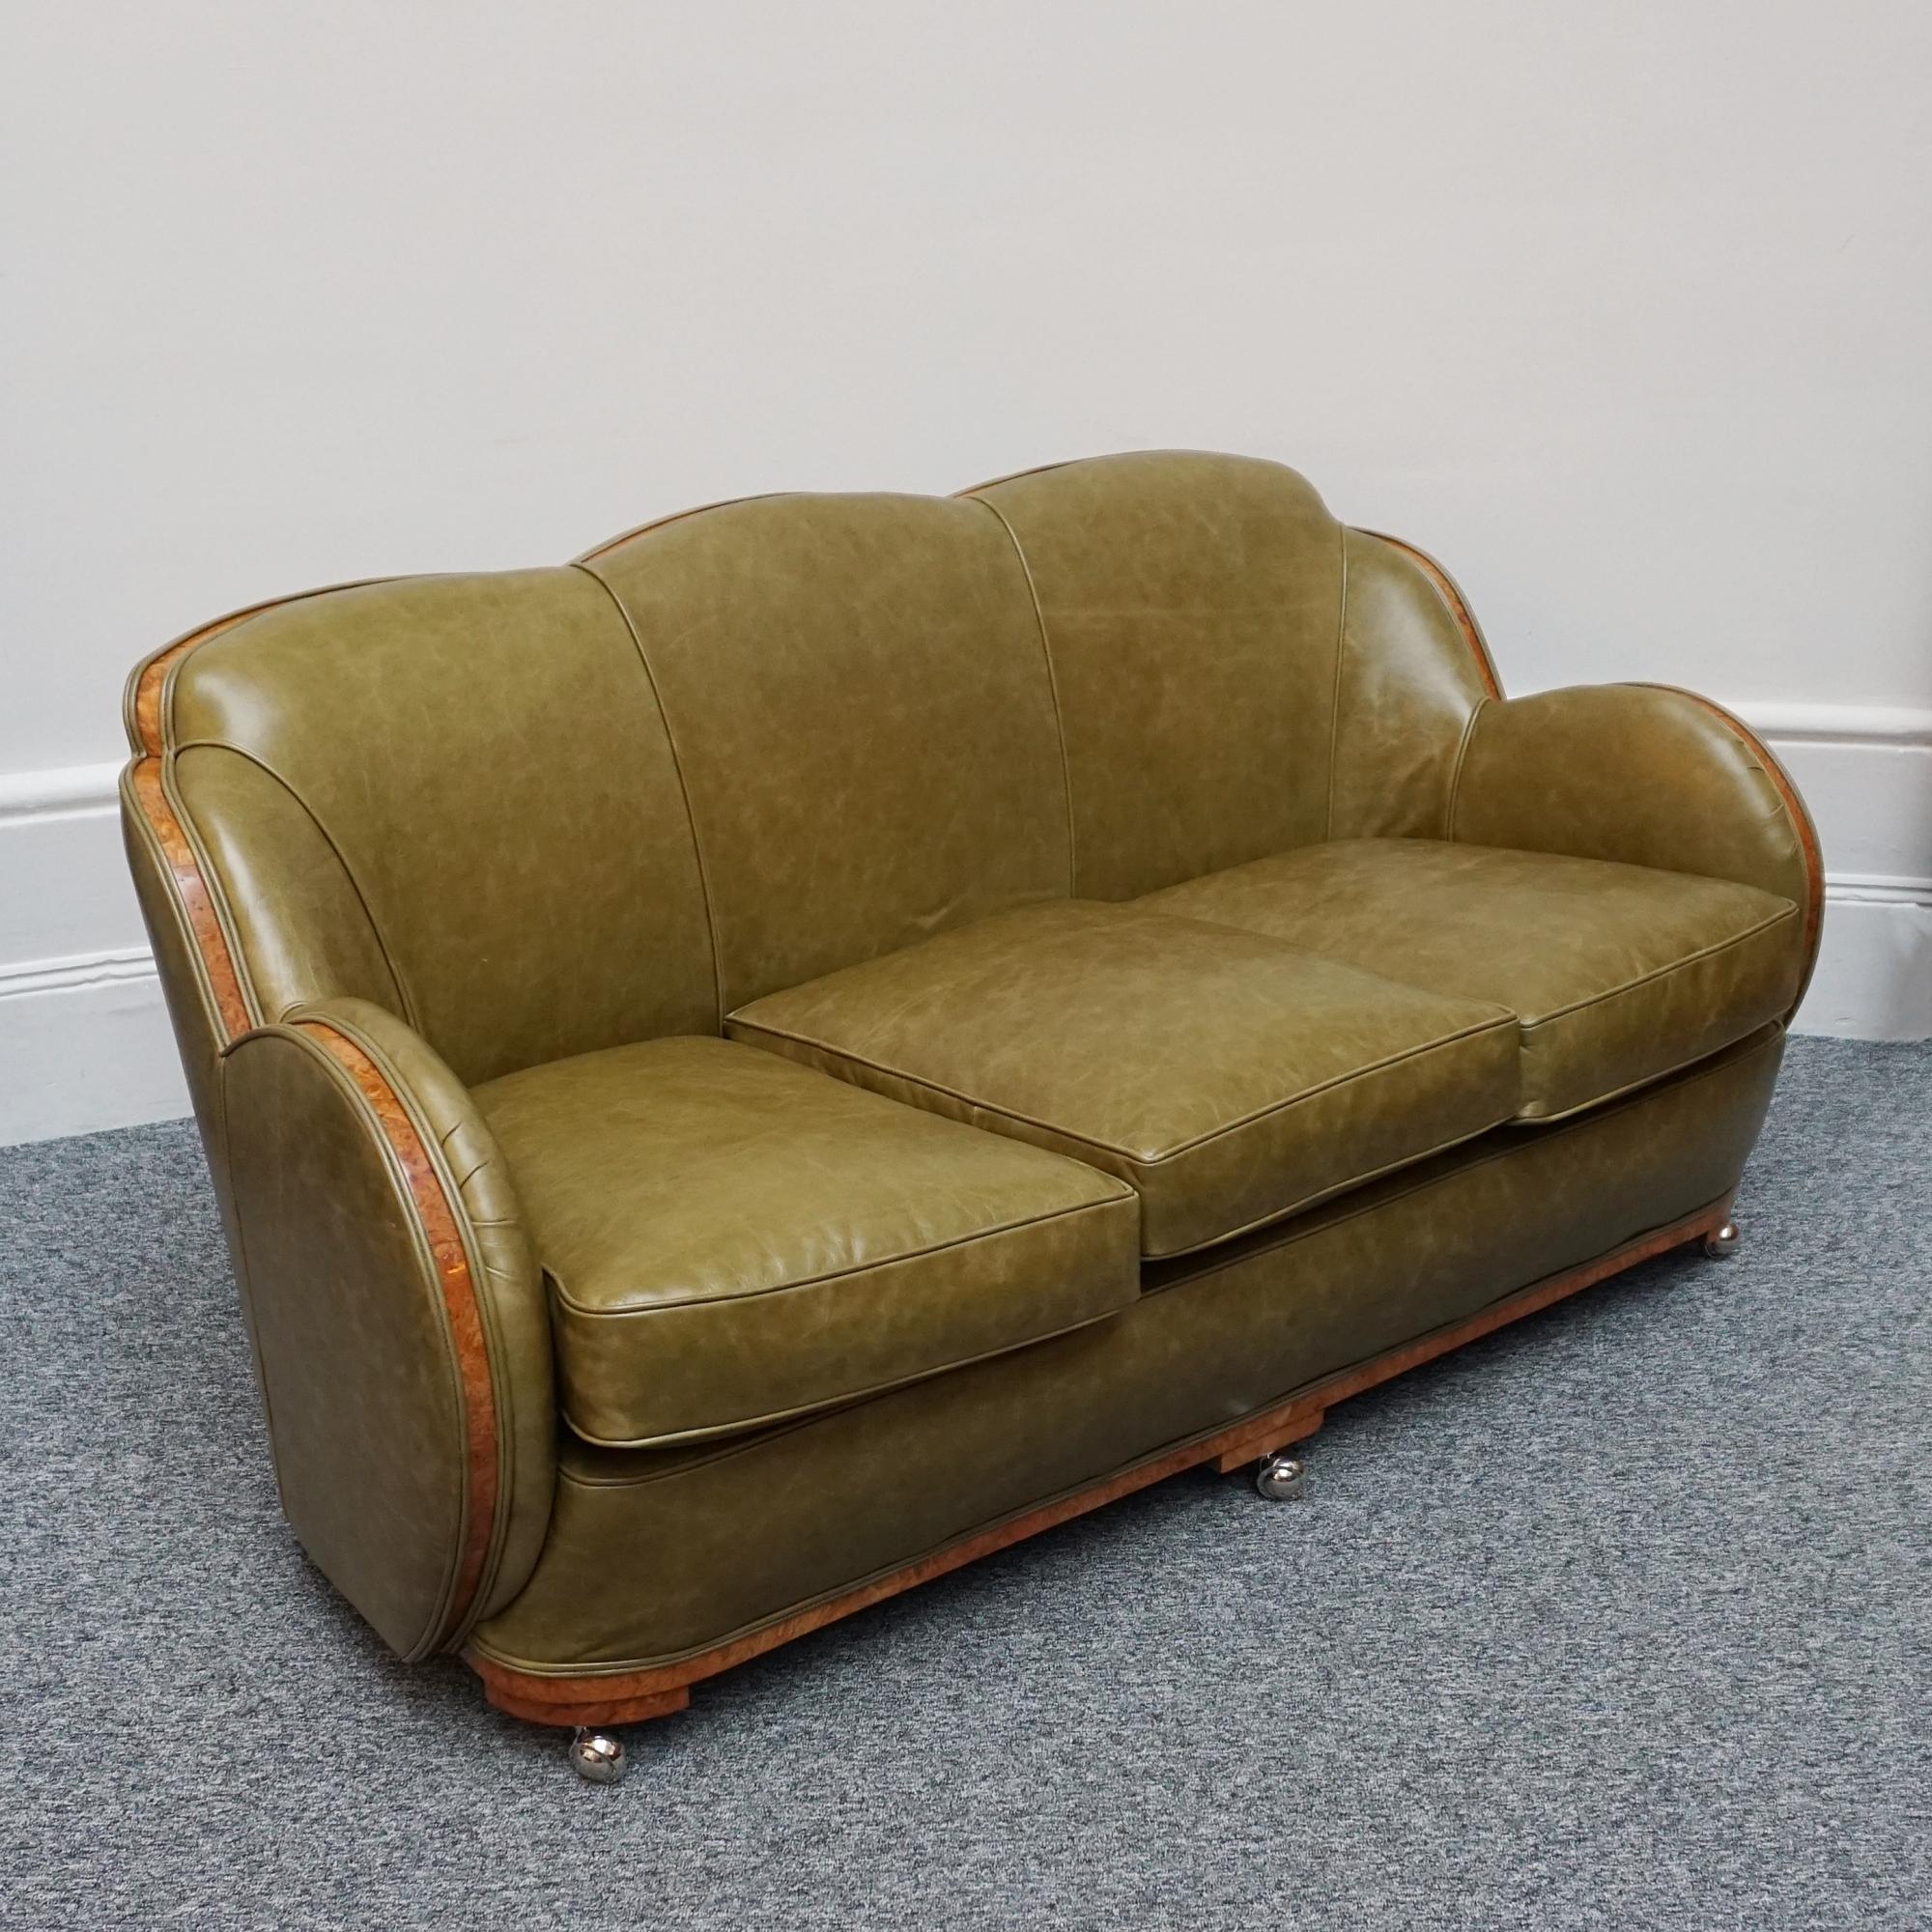 Early 20th Century English Art Deco Cloud Sofa by Harry & Lou Epstein Upholstered in Green Leather  For Sale